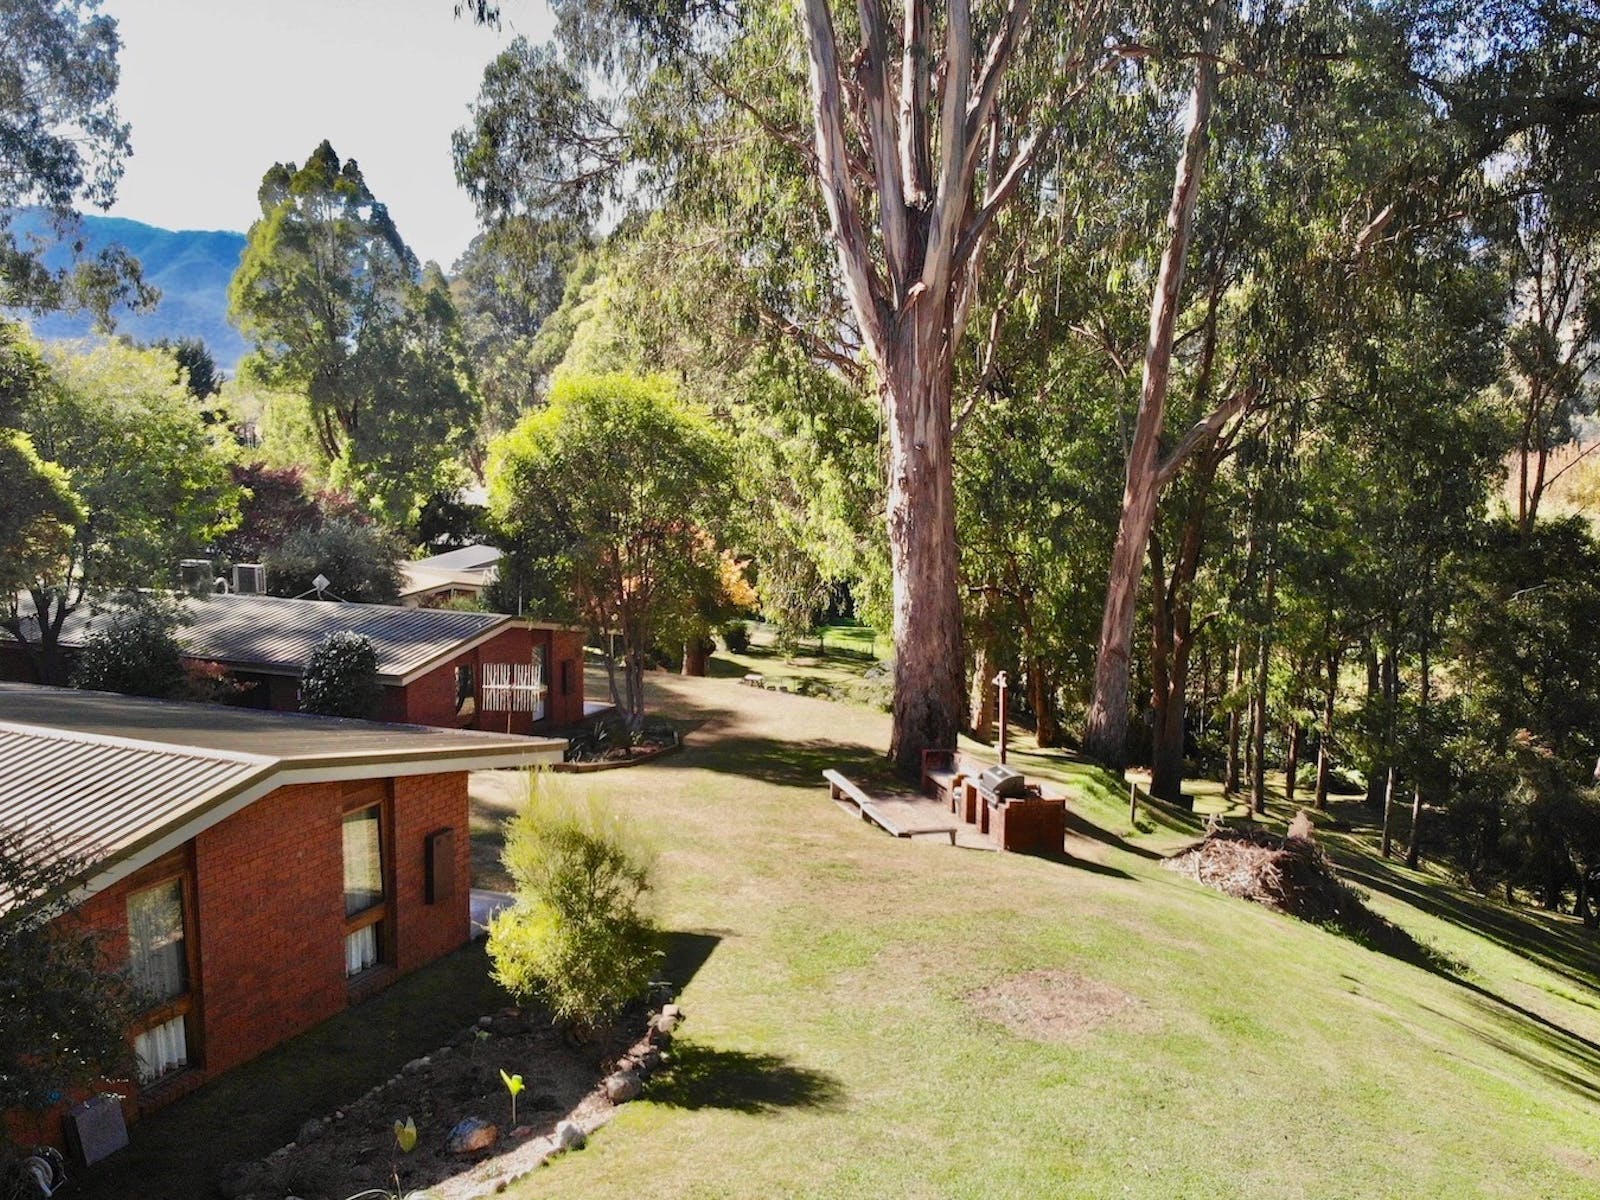 The Cottages are set on three acres of landscaped gardens and natural bushland.